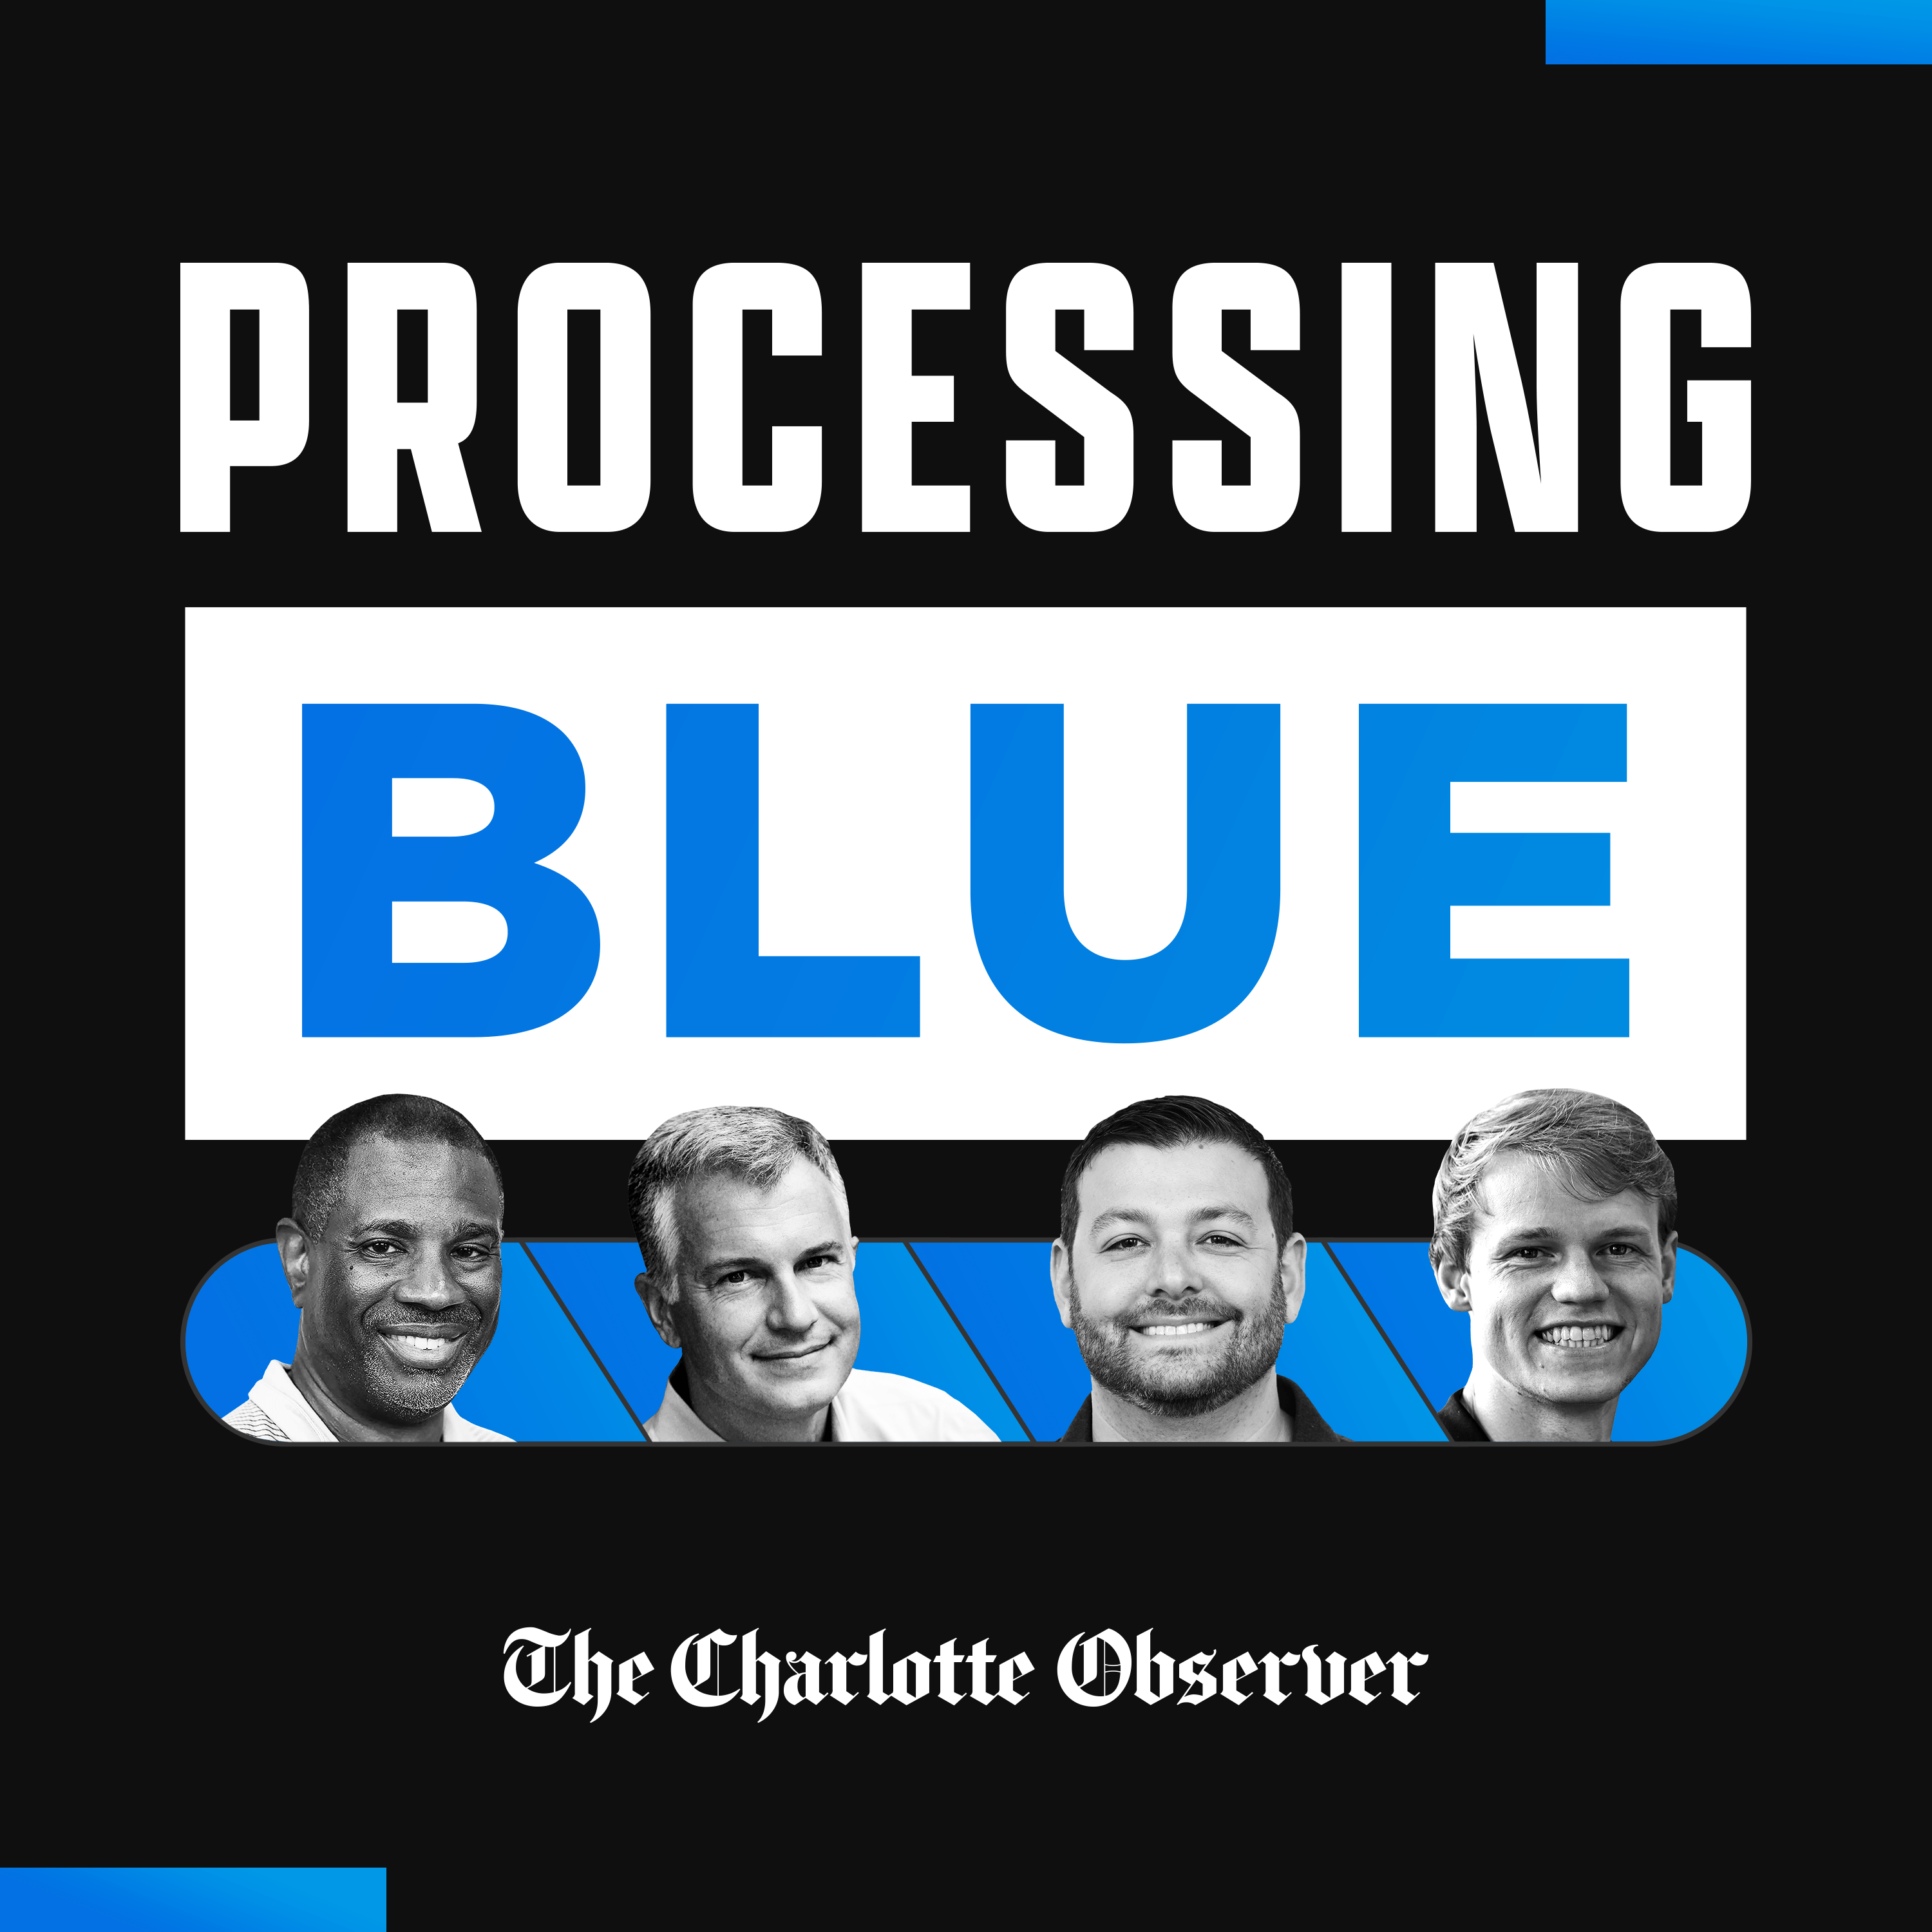 Processing Blue: A Panthers' Podcast